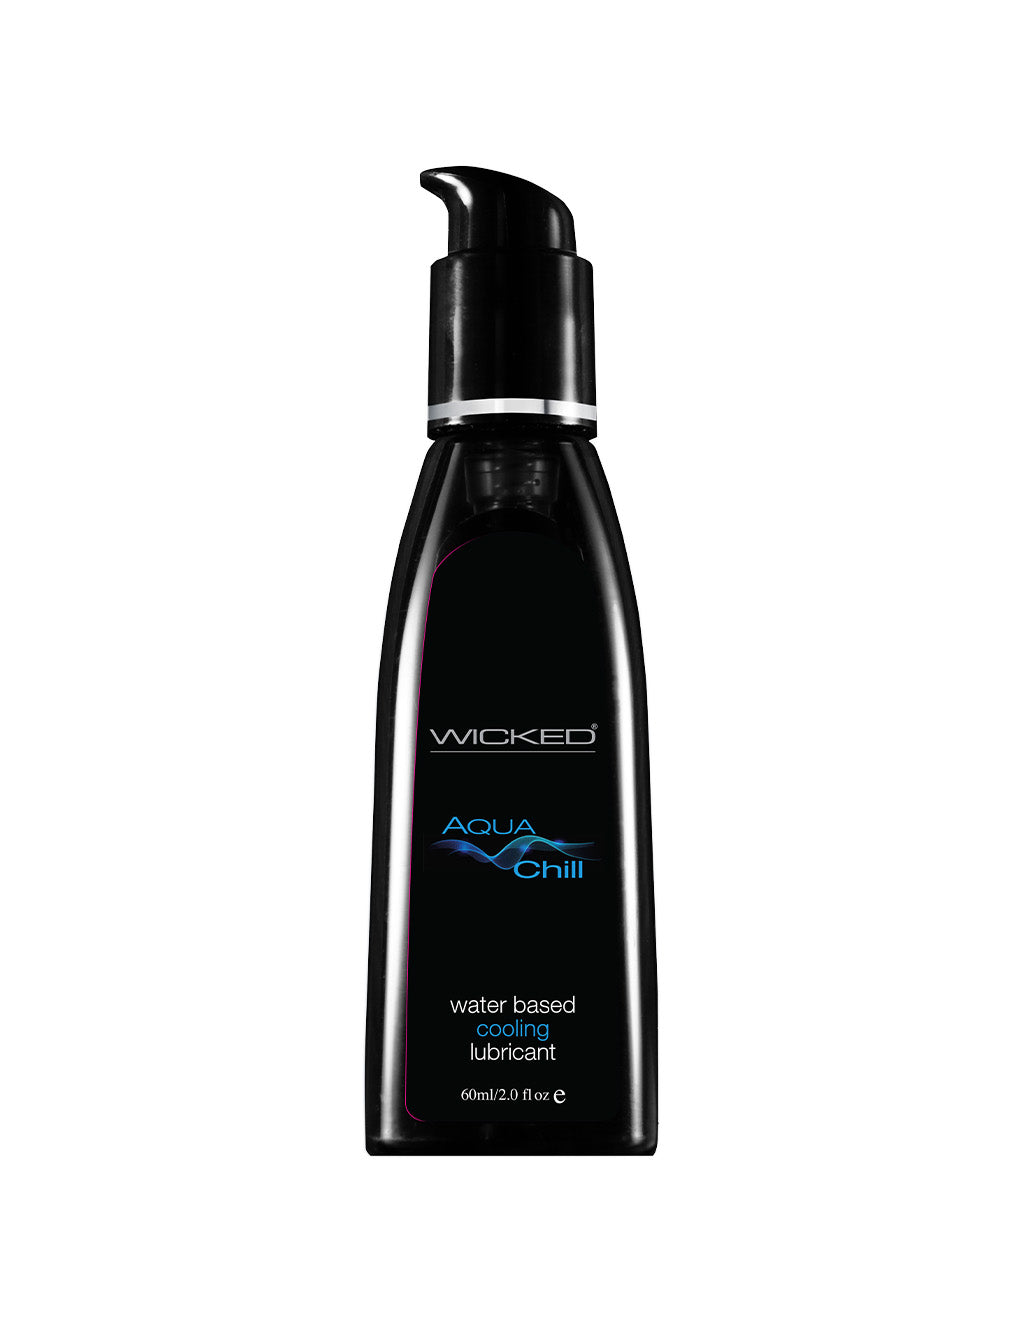 Wicked Aqua Chill Water-Based Lubricant- 2oz- front